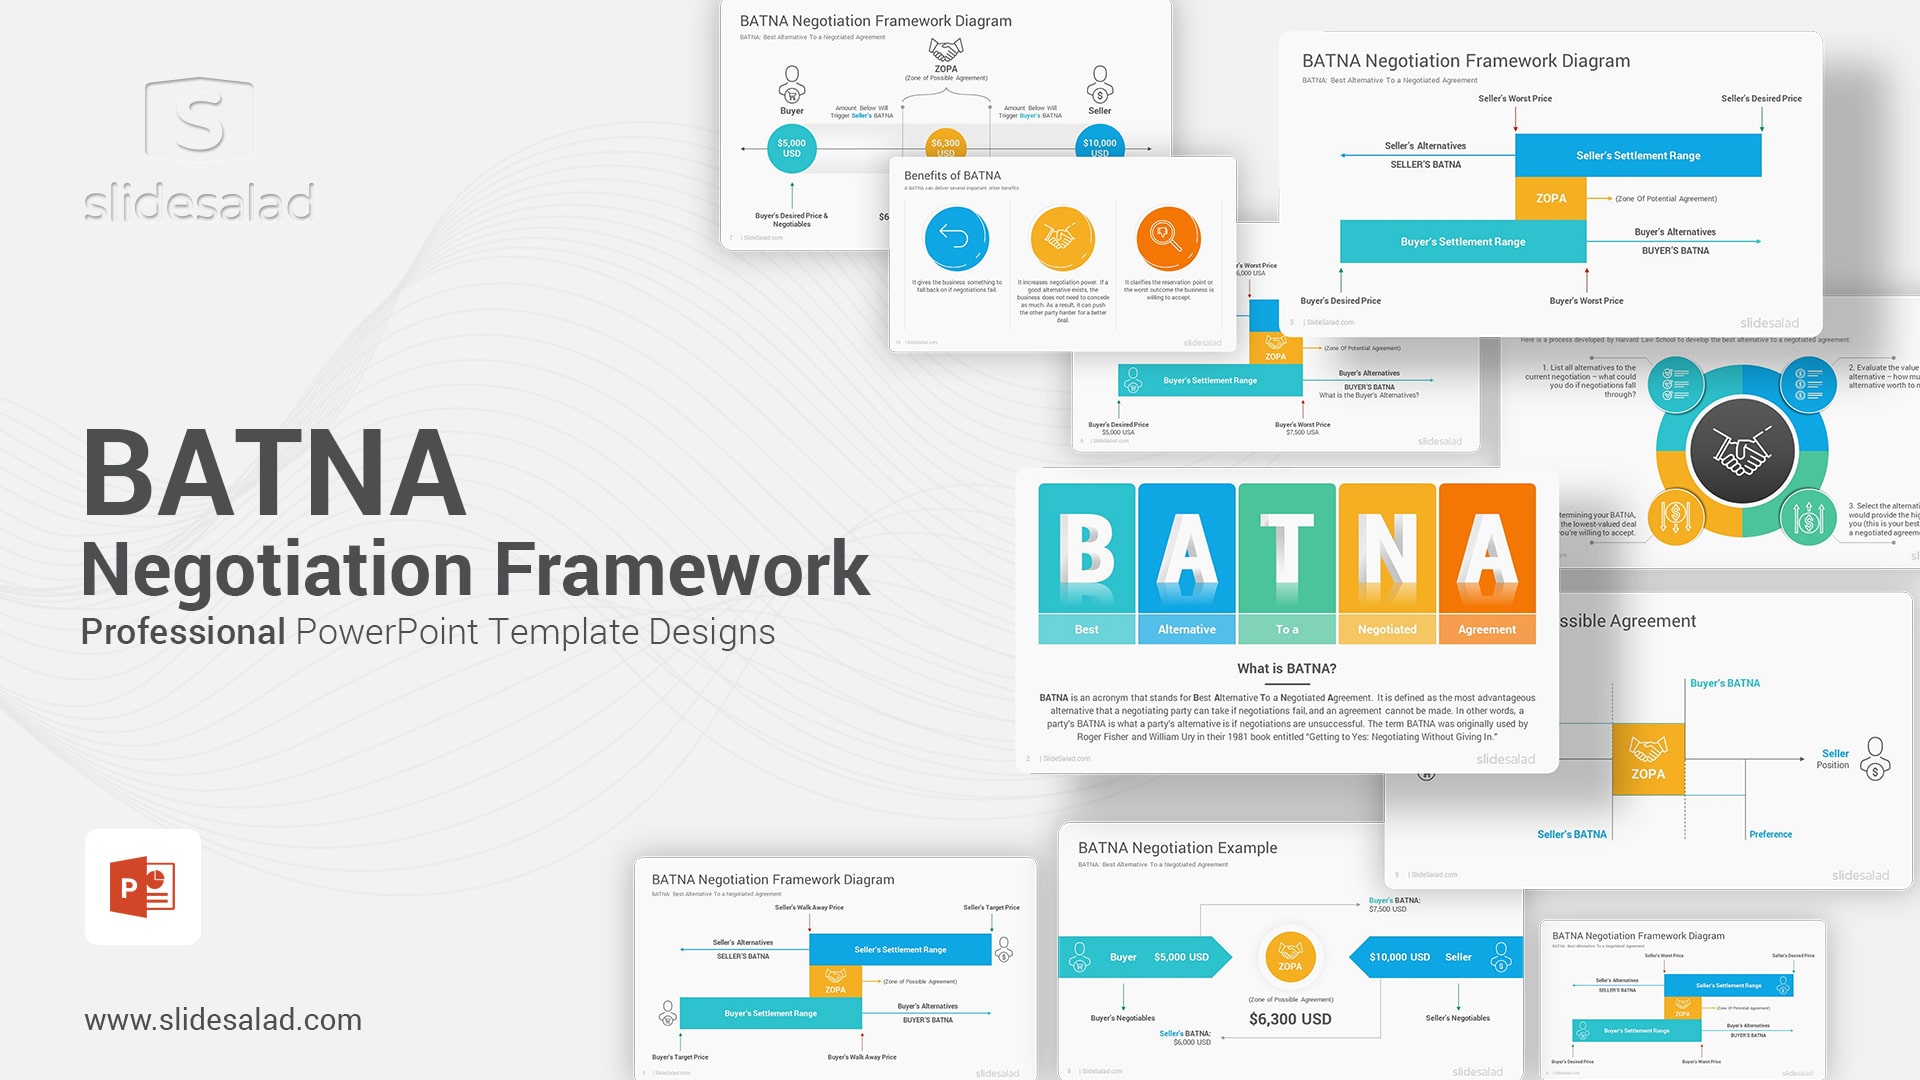 BATNA Negotiation Framework PowerPoint Template Diagrams - Cool PPT Template to Execute an Effective Alternative to a Negotiated Agreement